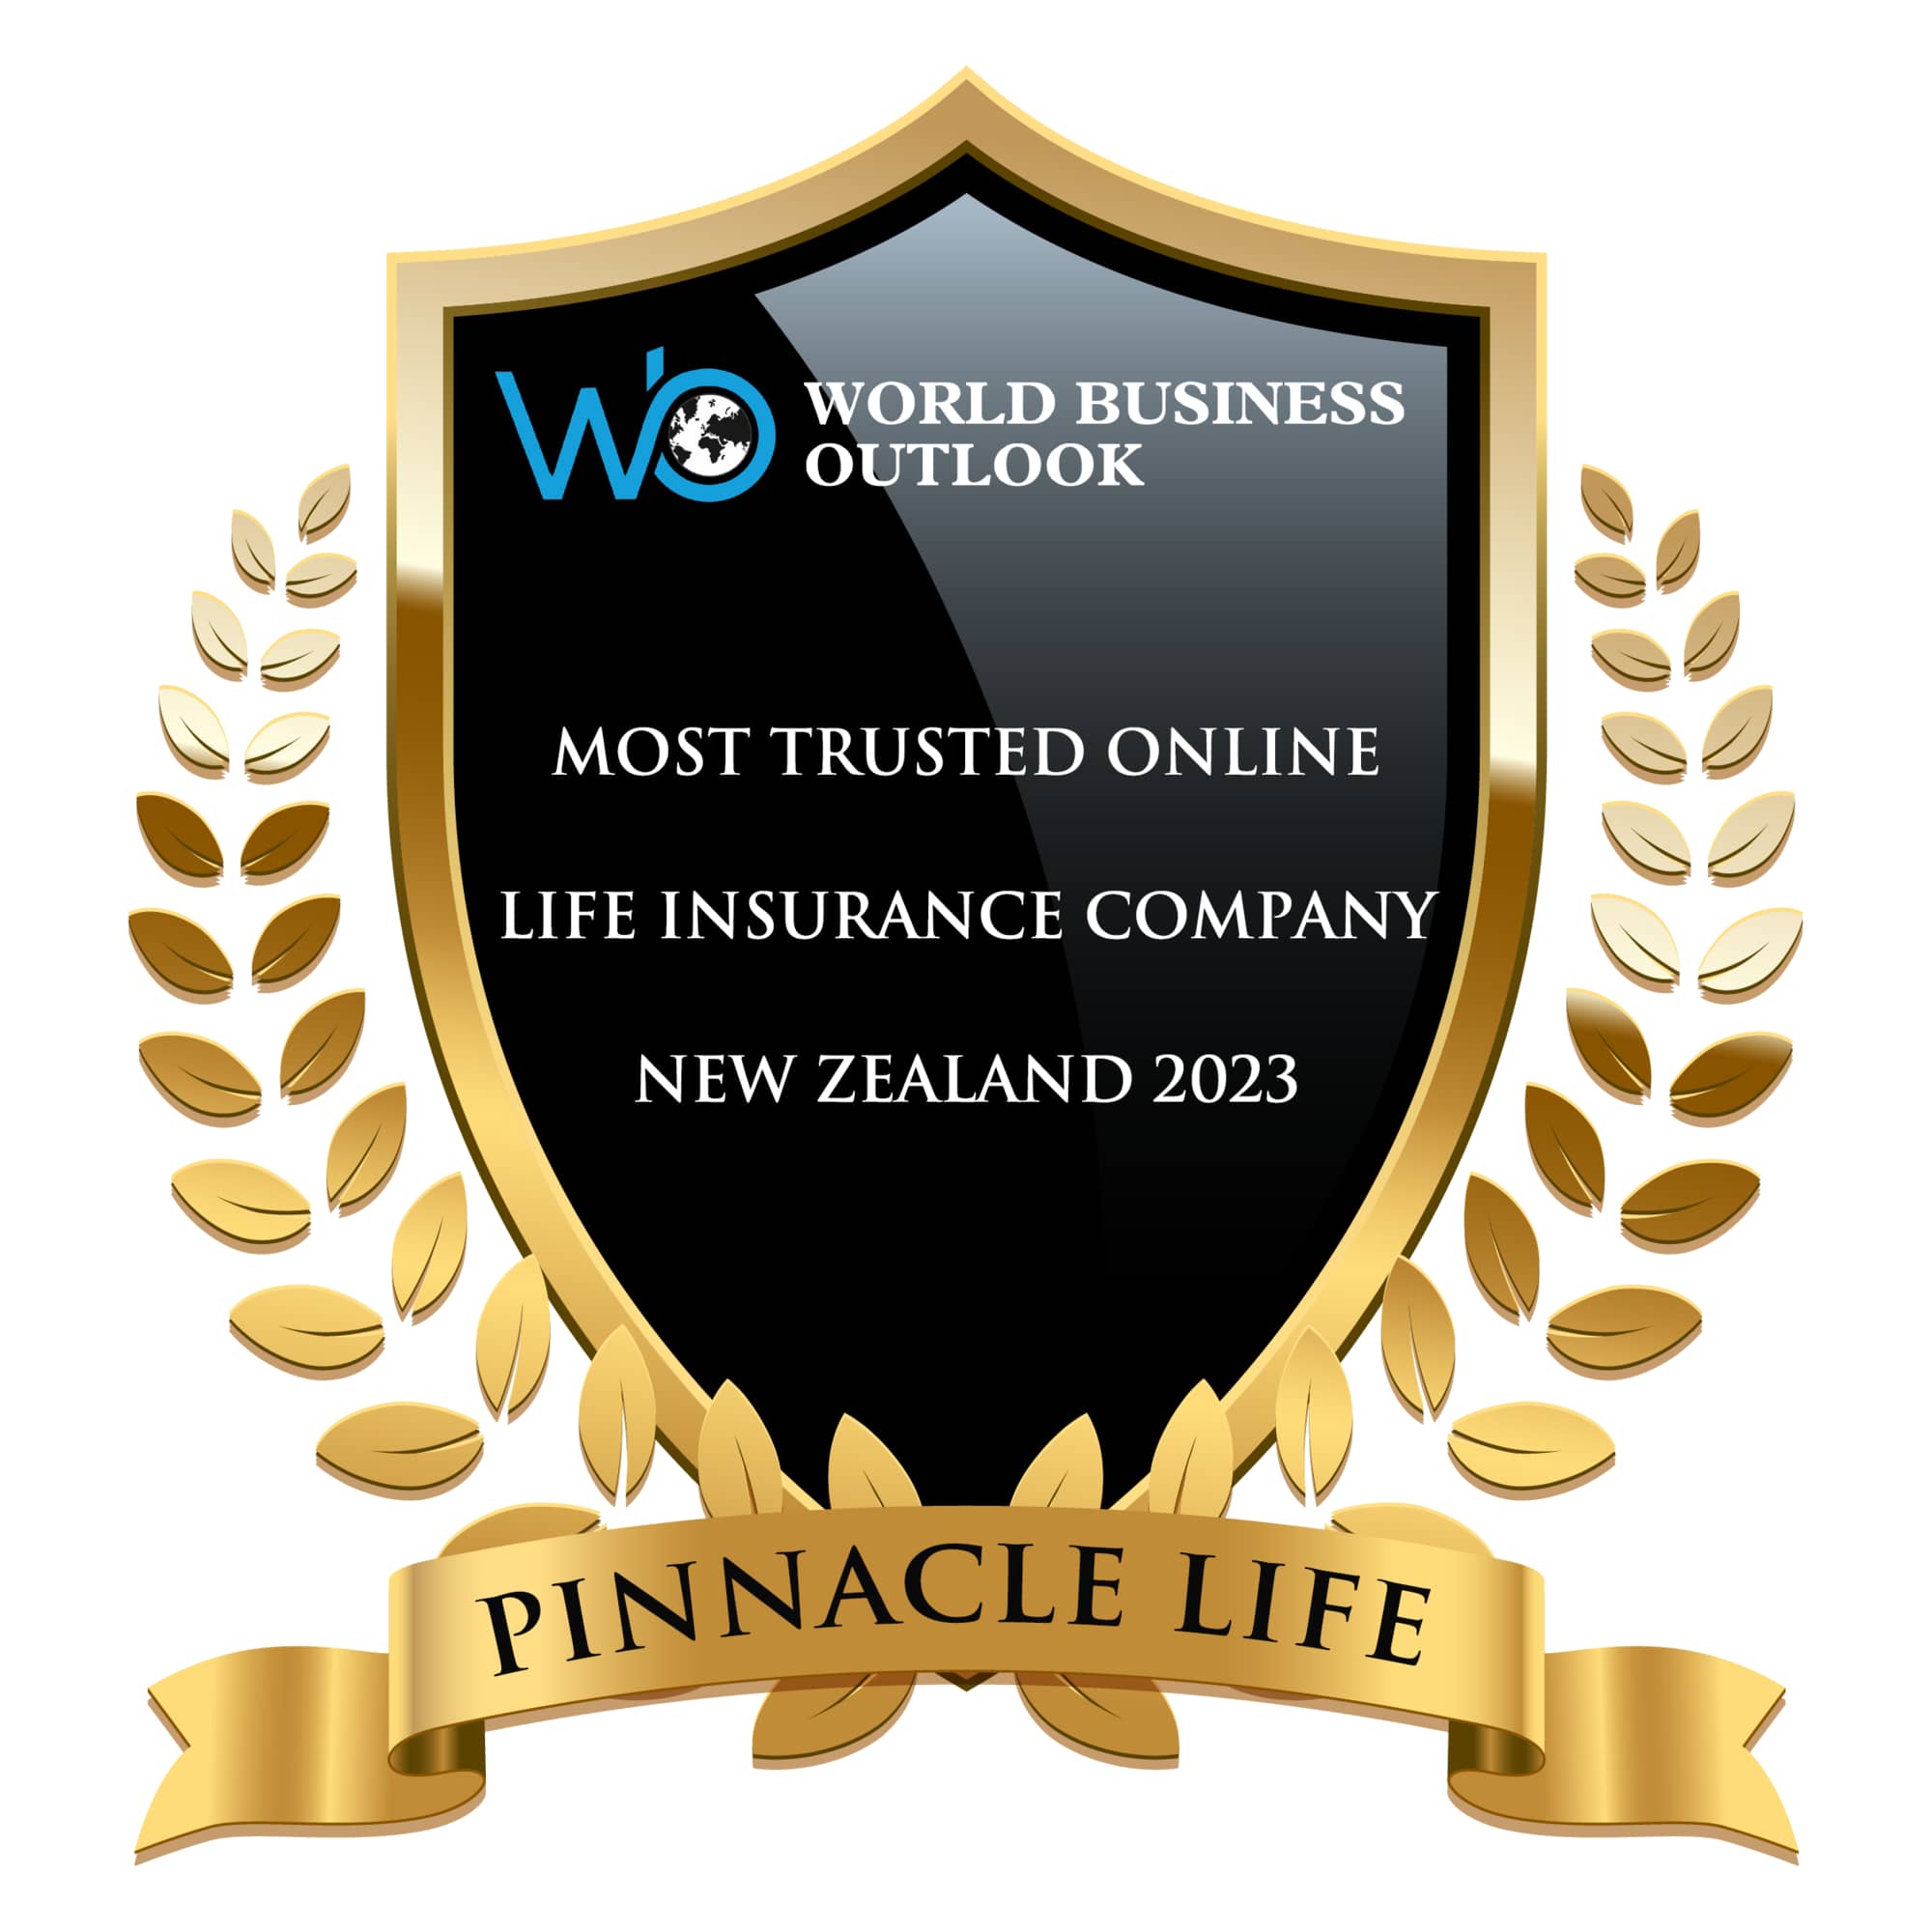 Pinnacle Life voted Most Trusted Online Life Insurance Company, New Zealand, 2023. 